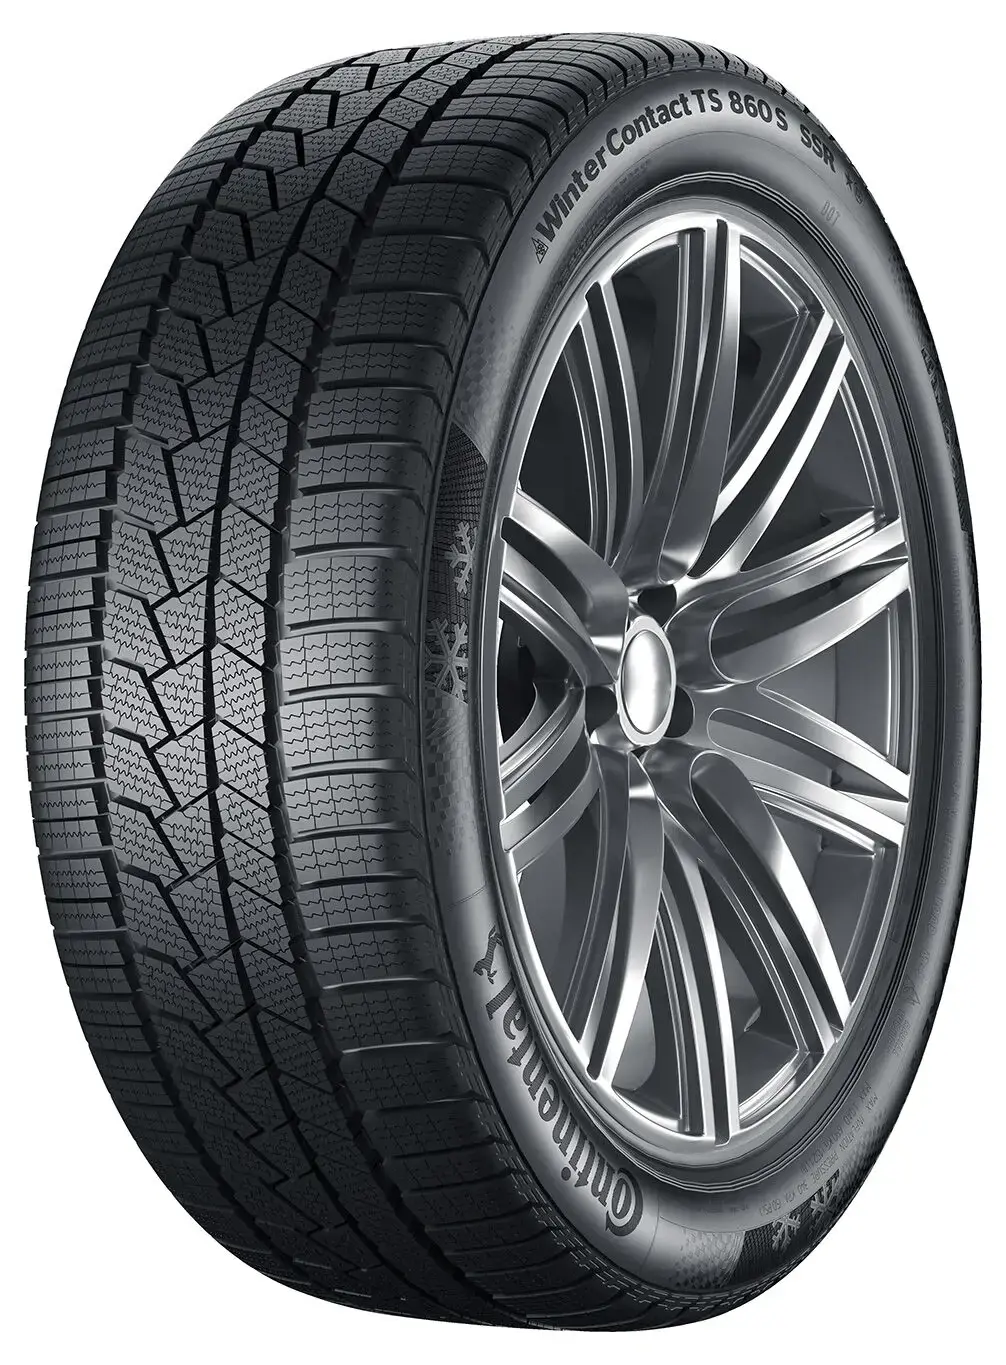 Continental 205 60 R16 96H WinterContact TS 860 S XL MS 15264976